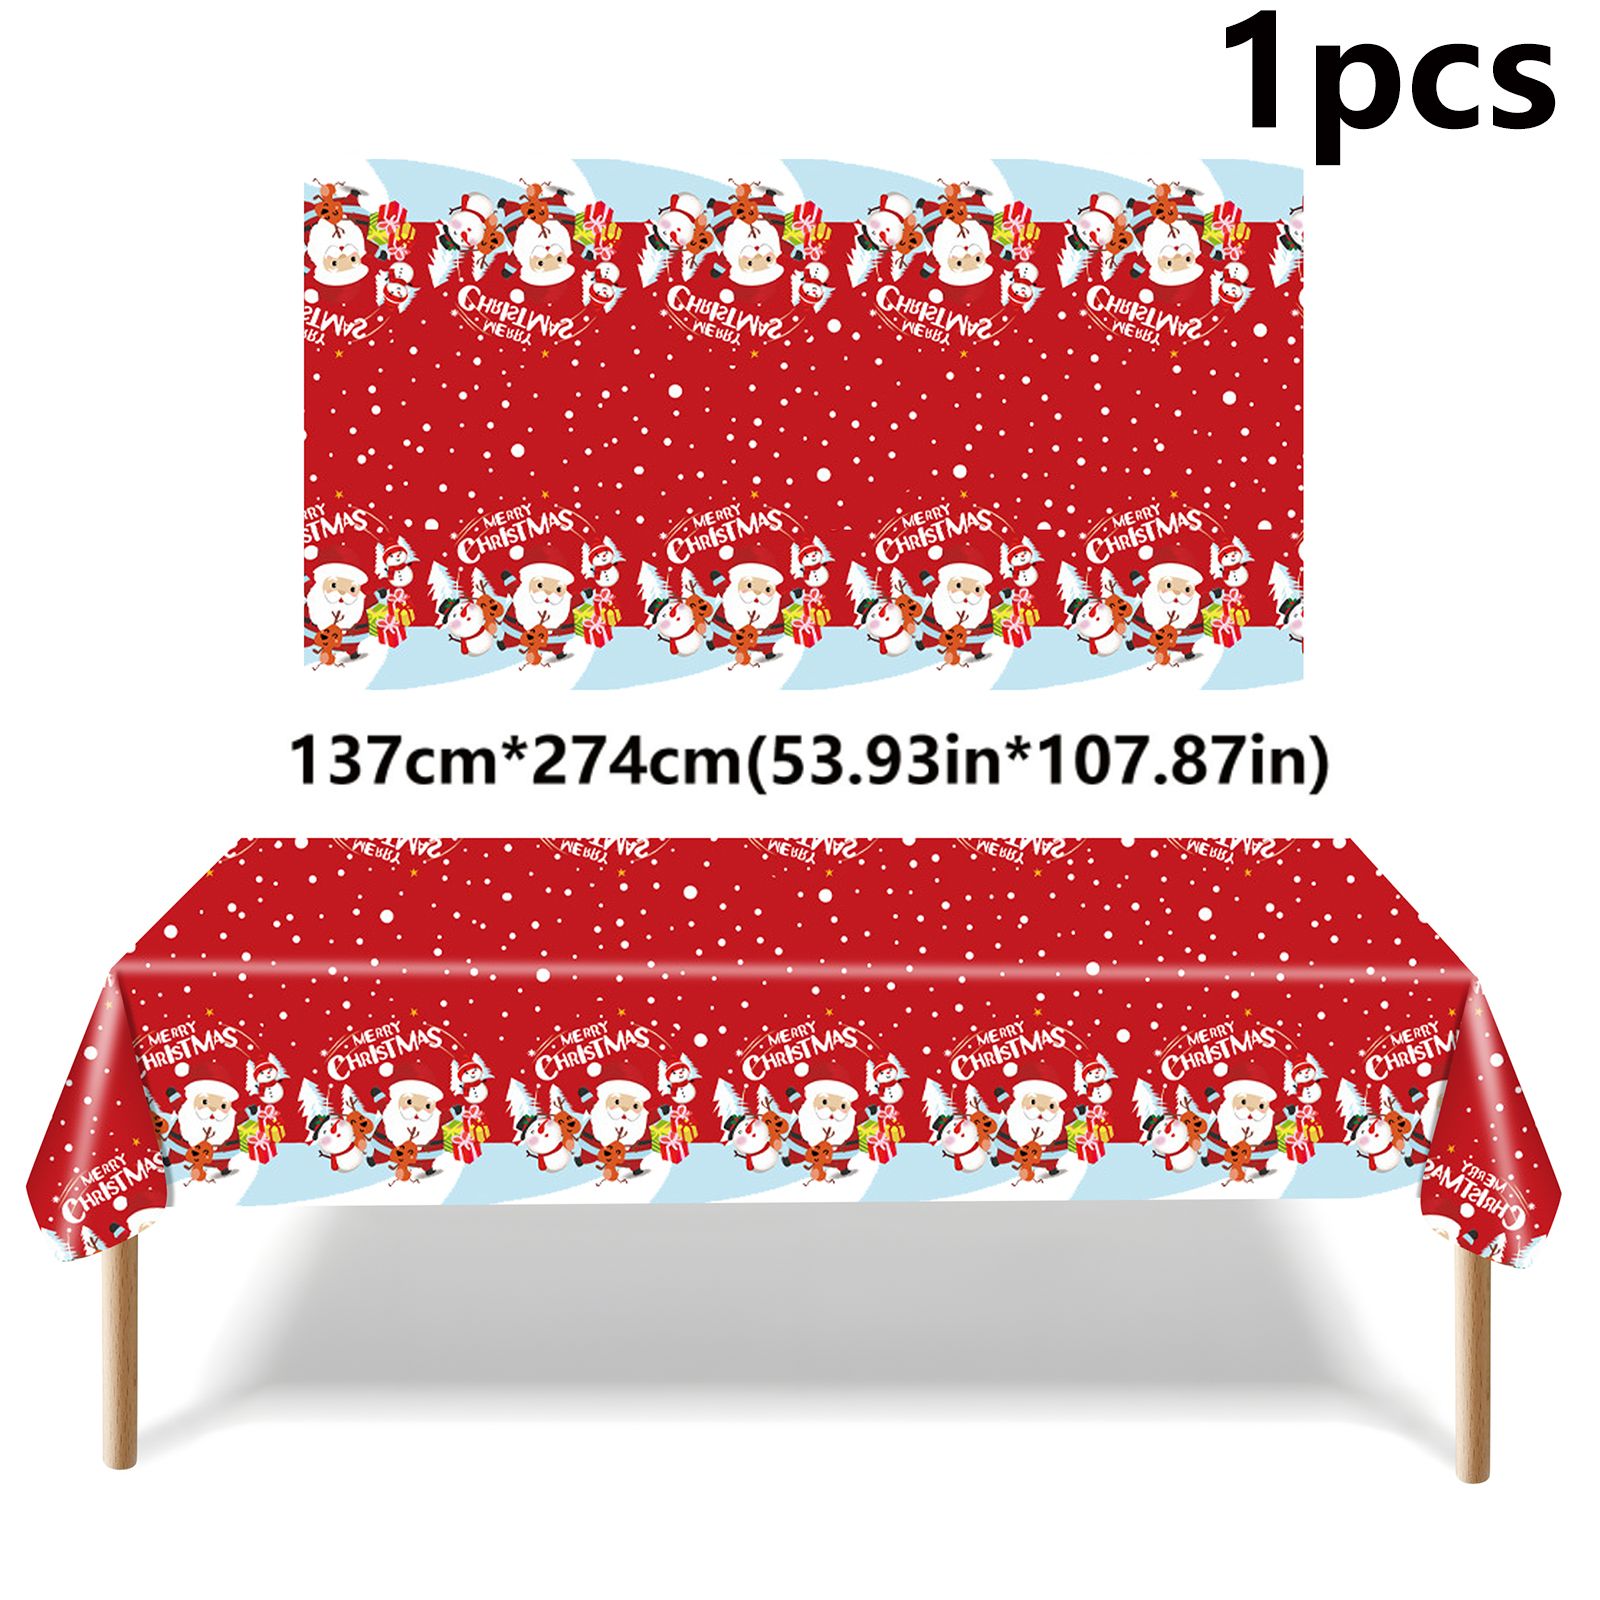 Combo Red Cartoon Santa Claus Themed Holiday Party Decoration Set: Paper Plates, Cups, Tablecloth, C